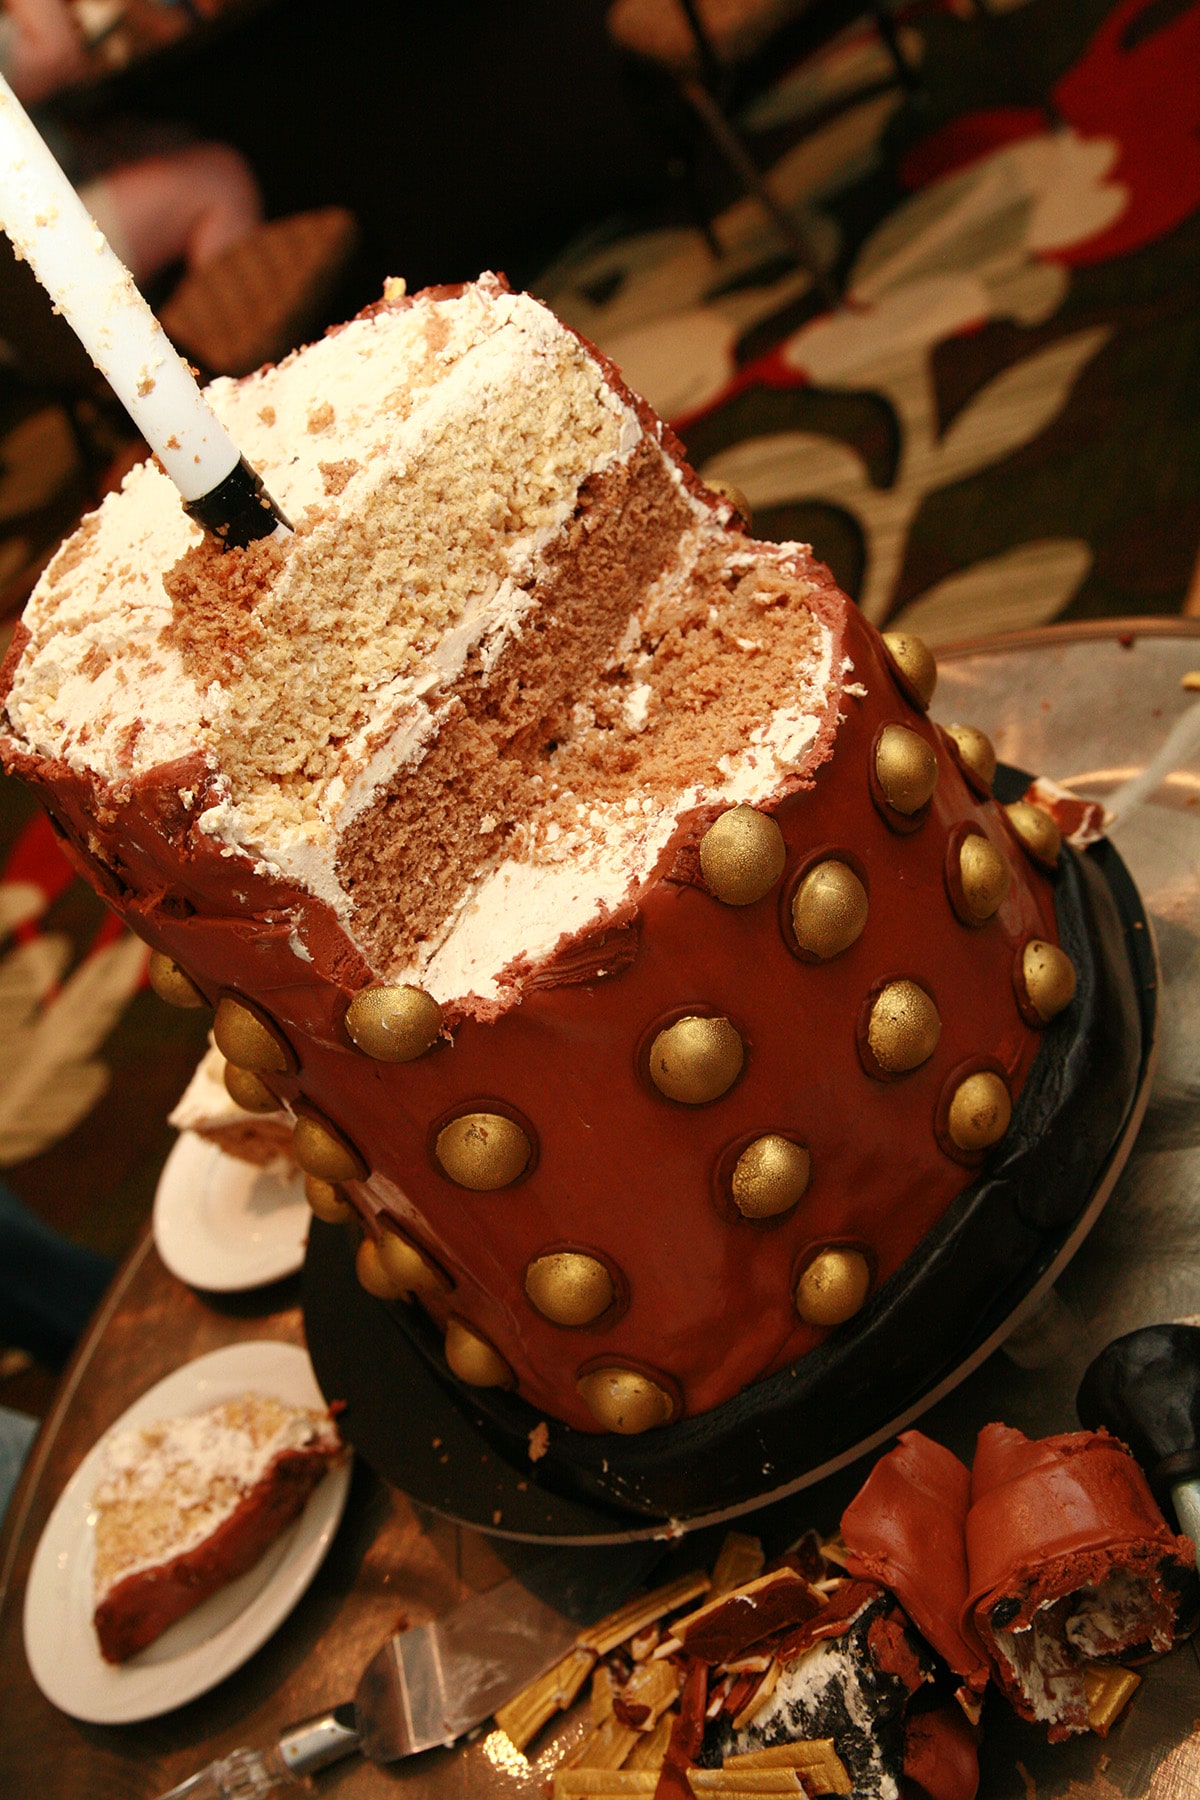 Half a Dalek cake, after much of it has been cut and served.